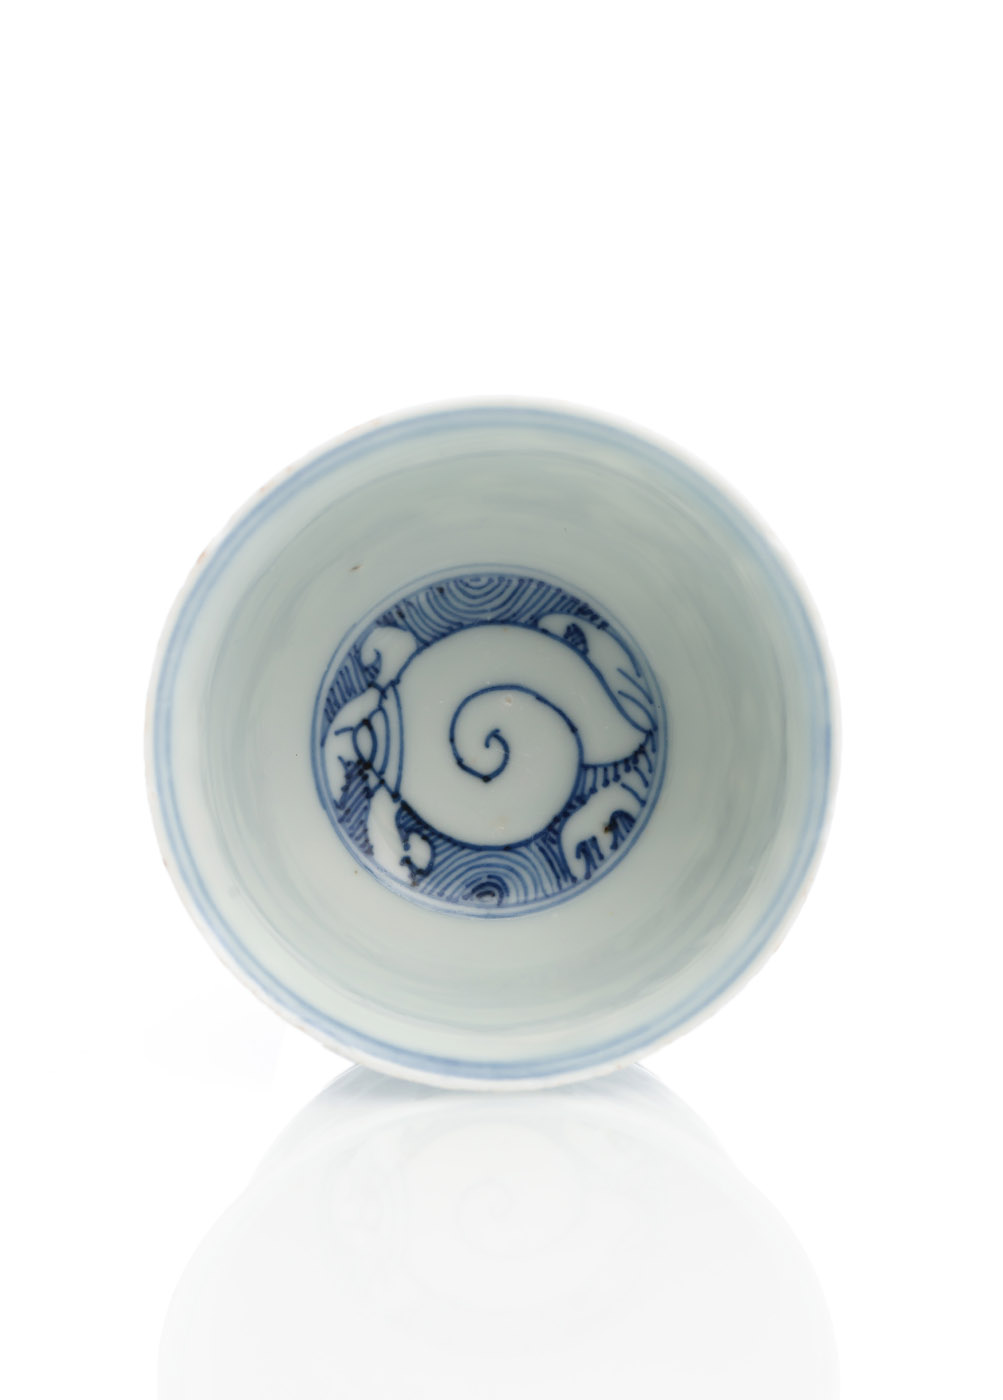 A RARE BLUE AND WHITE STEM CUP - Image 4 of 6